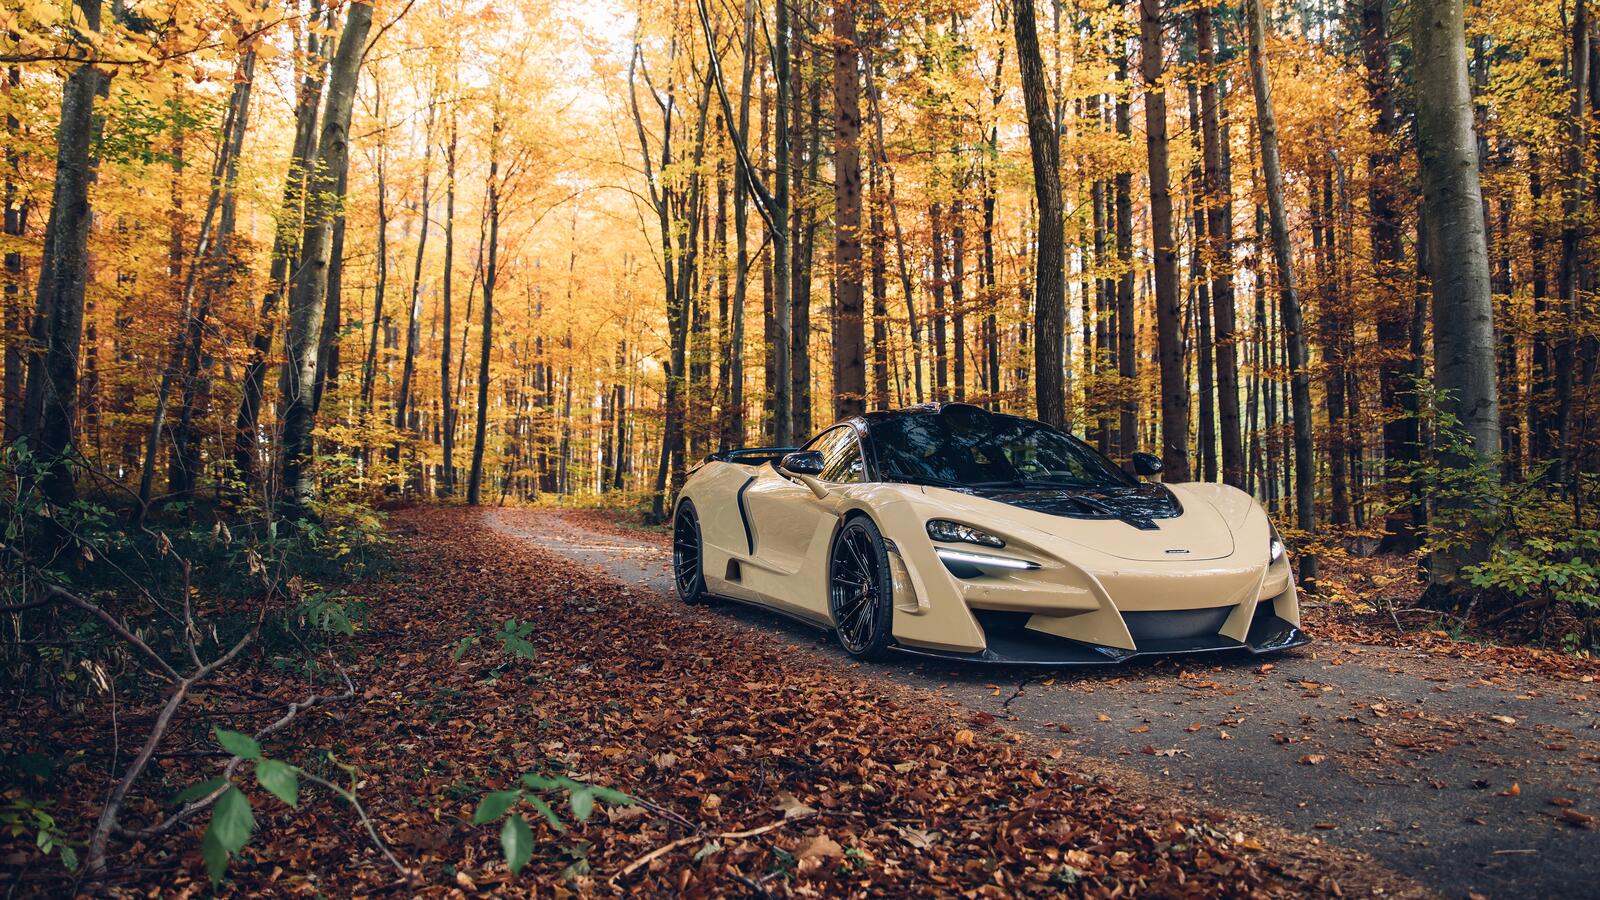 Free photo Beige mclaren 720s n-largo in an autumn forest during a leaf fall